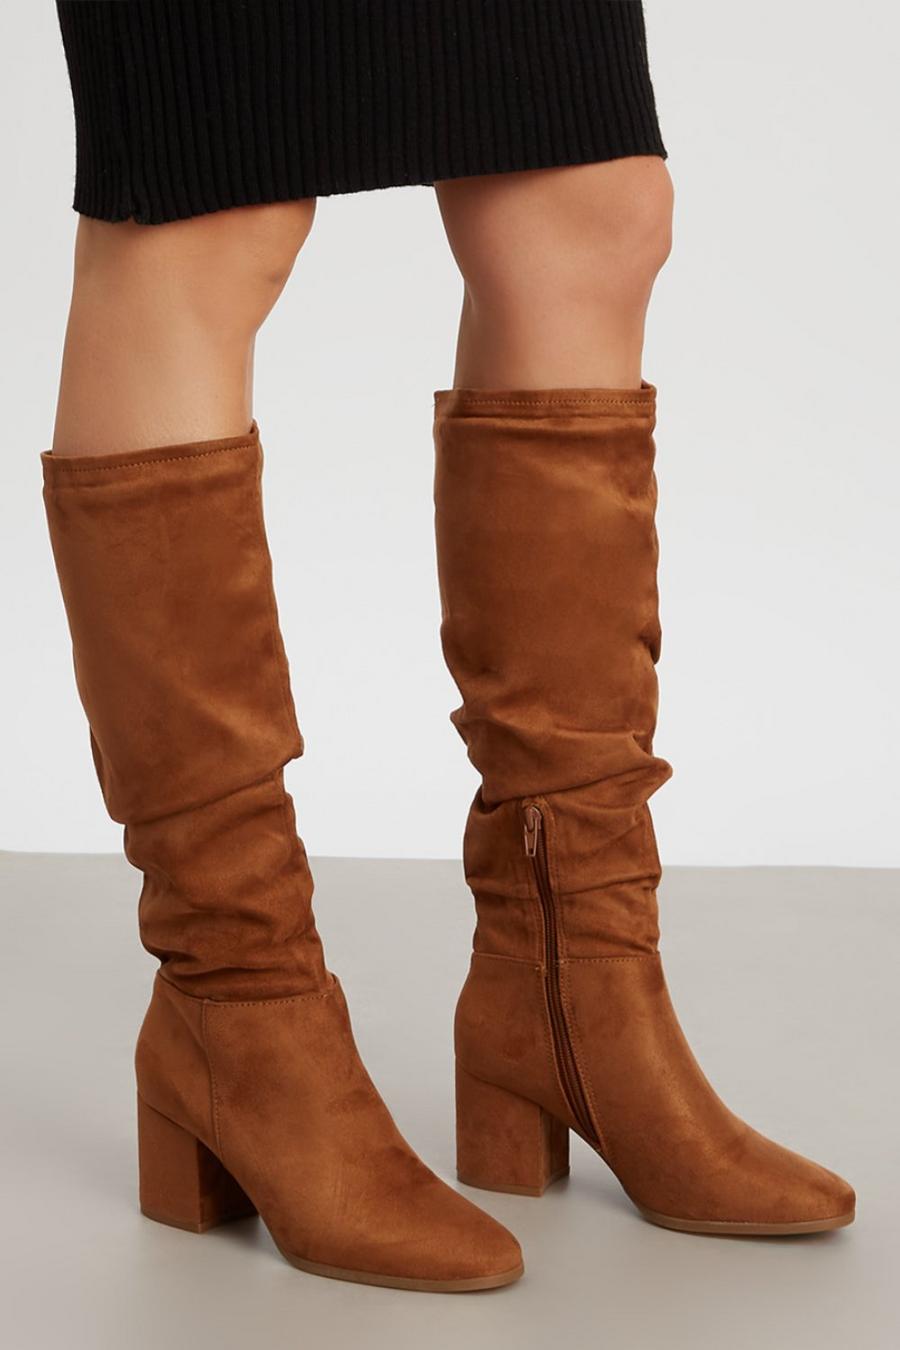 Good For The Sole: Kristie Comfort Slouchy Knee Boot